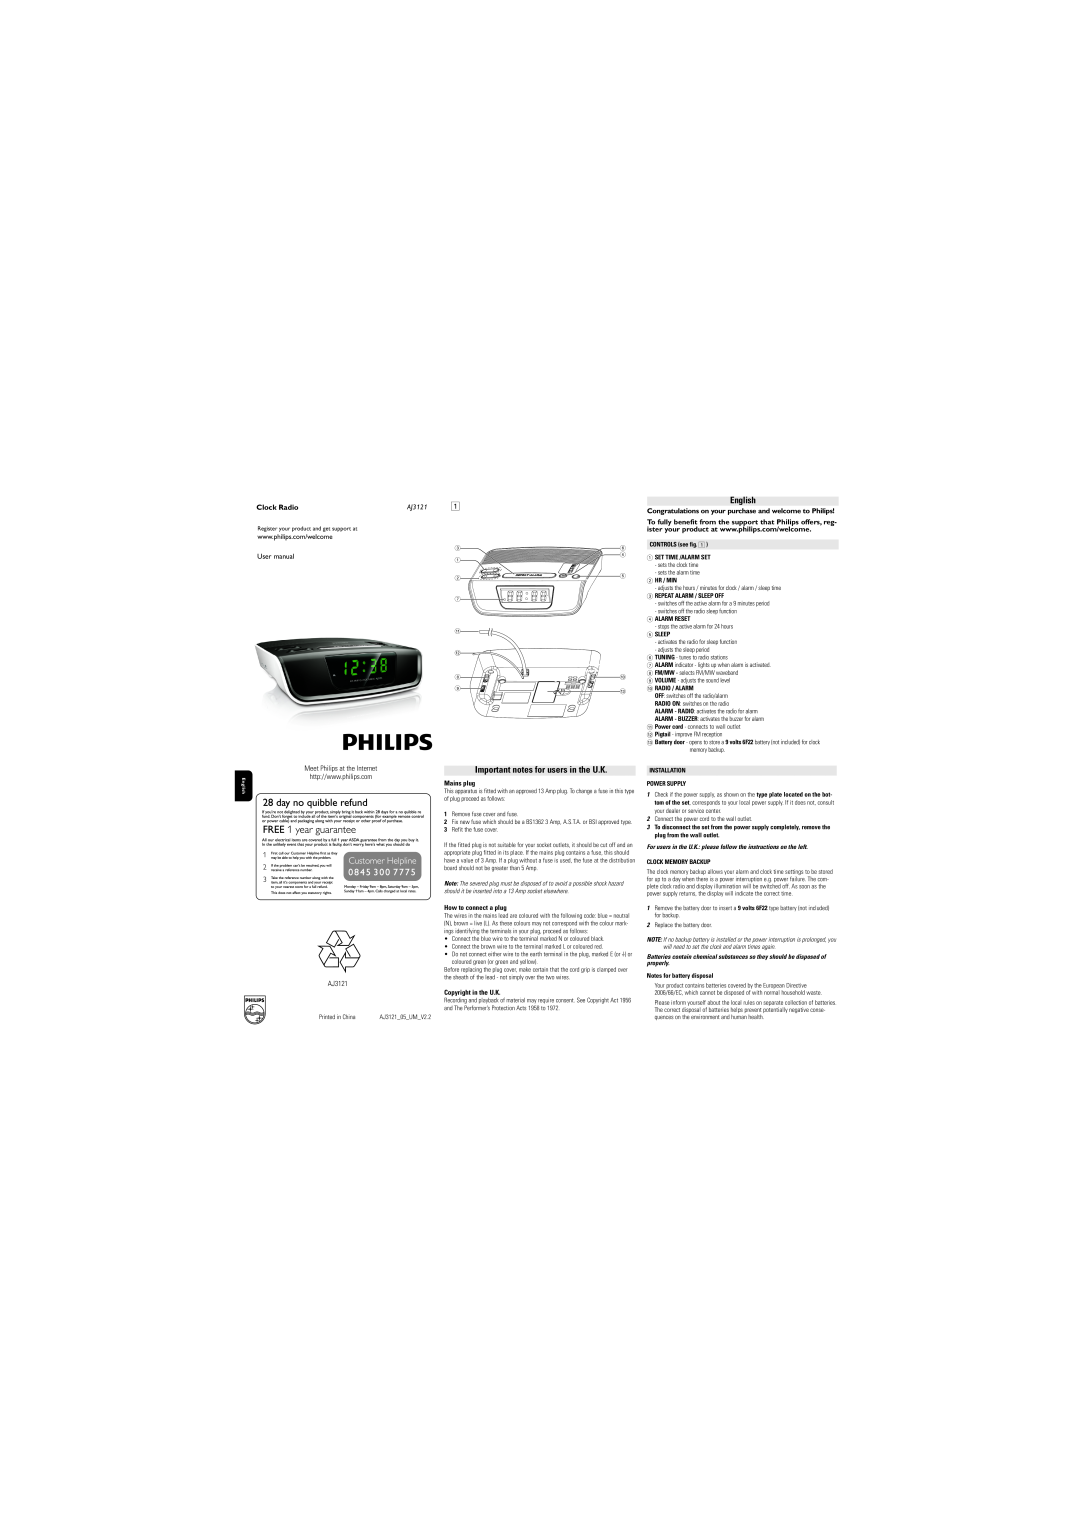 Philips AJ3121/05 user manual English, Important notes for users in the U.K, User manual, Meet Philips at the Internet 